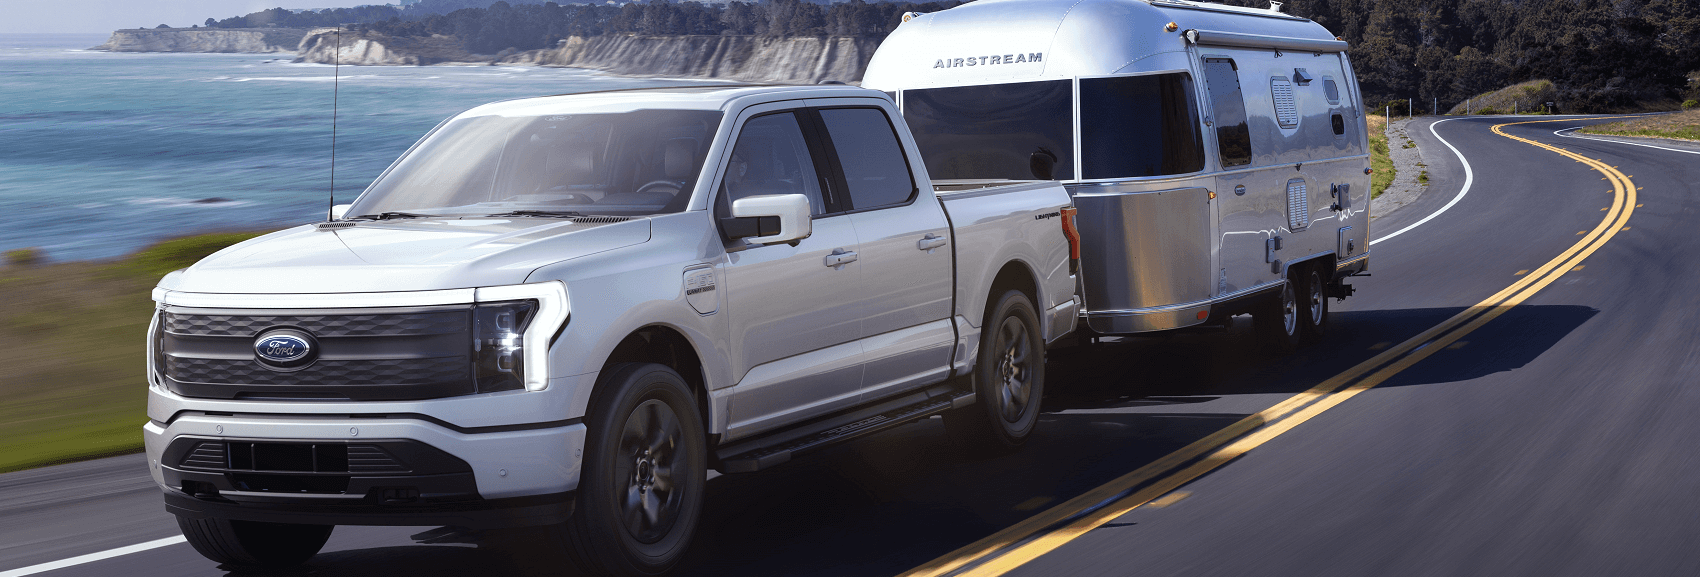 Ford F-150 Lightning Towing an Airstream